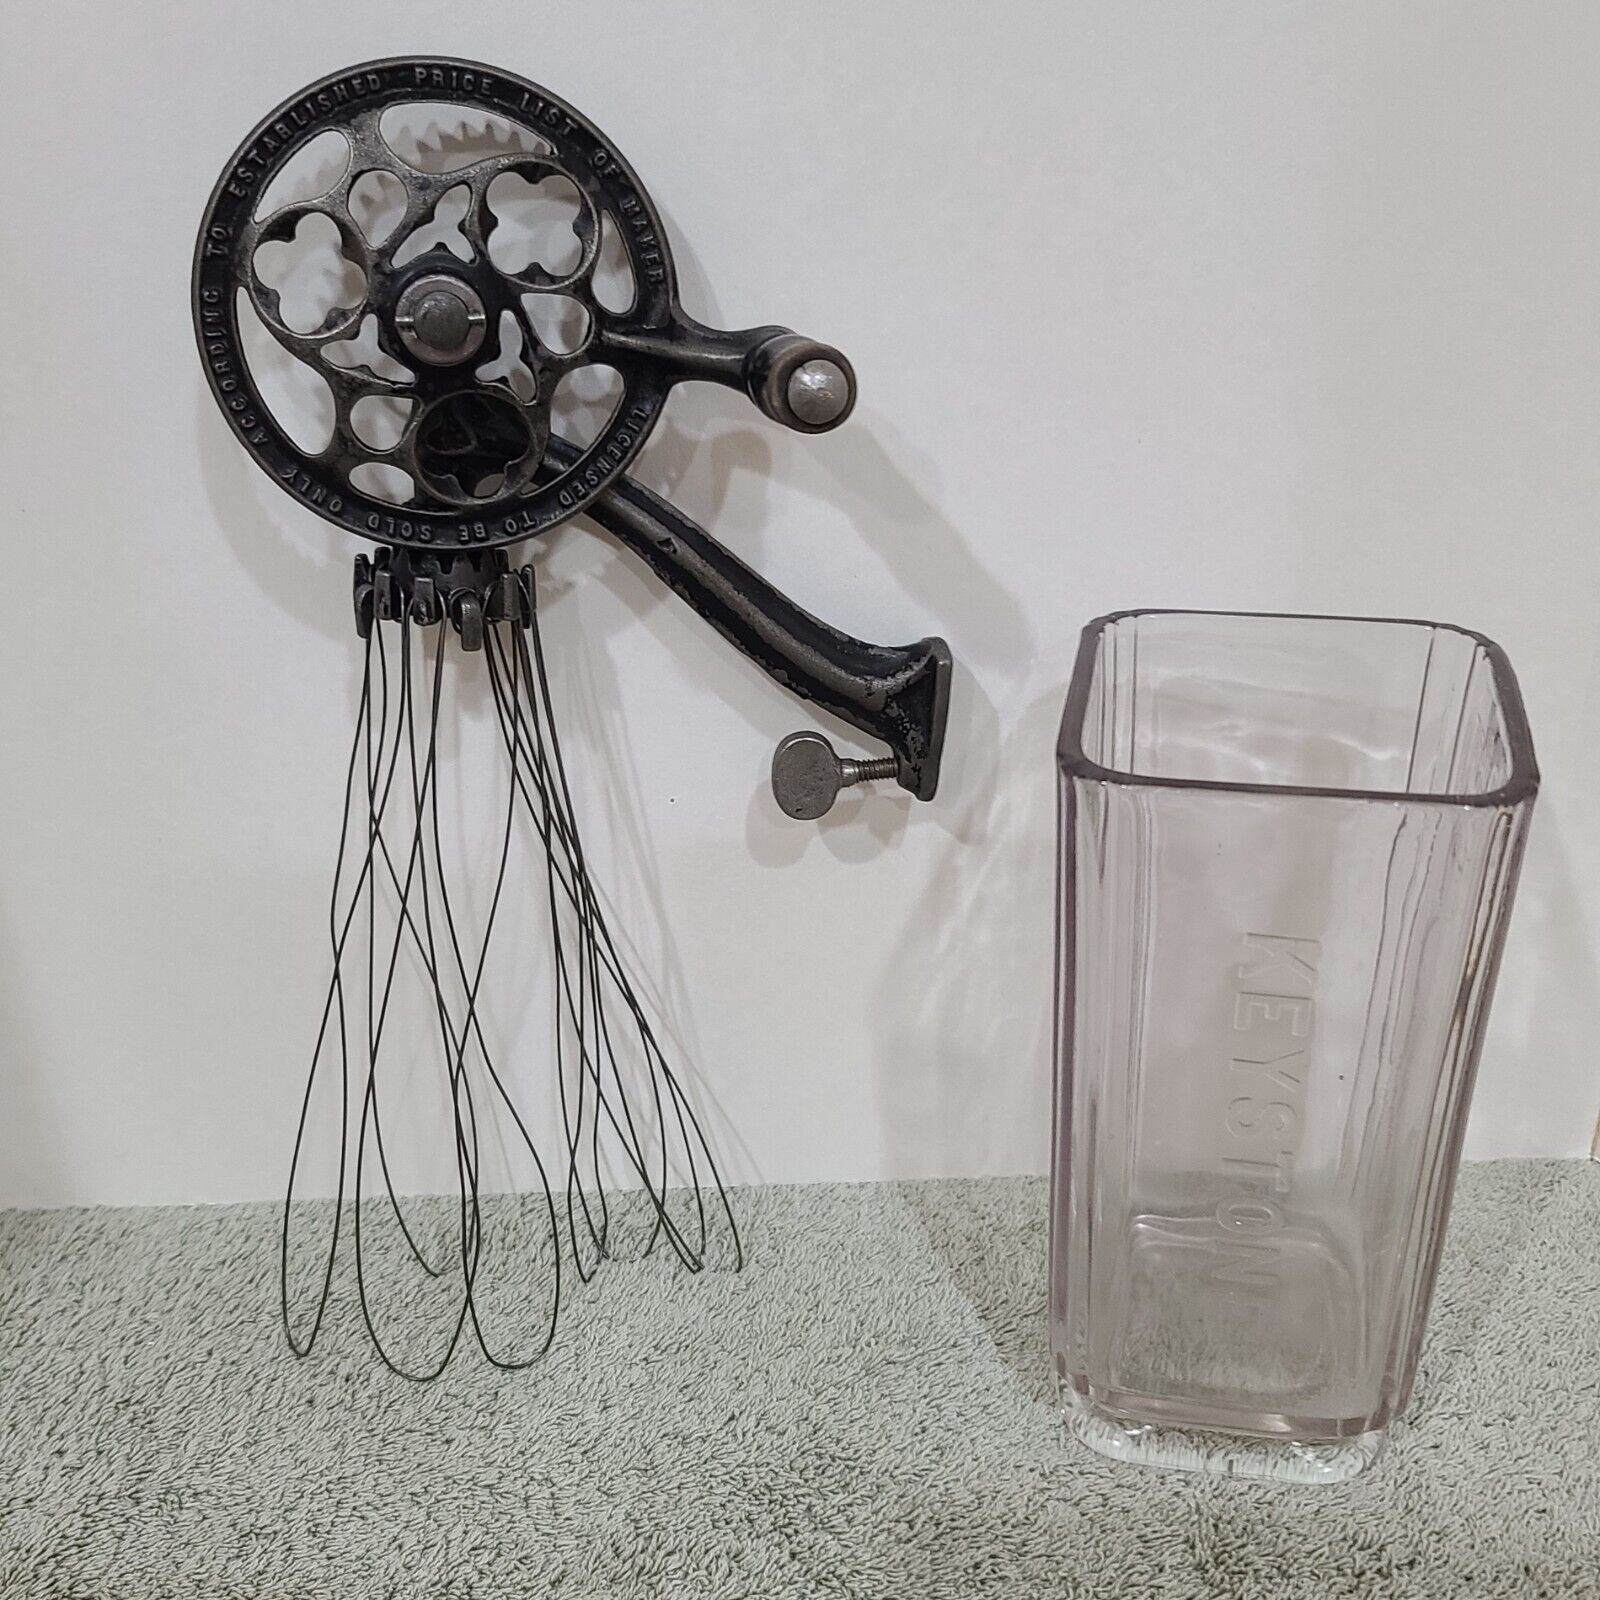 Antique Keystone Wall Mount Egg Beater with Correct Mixing Jar 1885 Patent